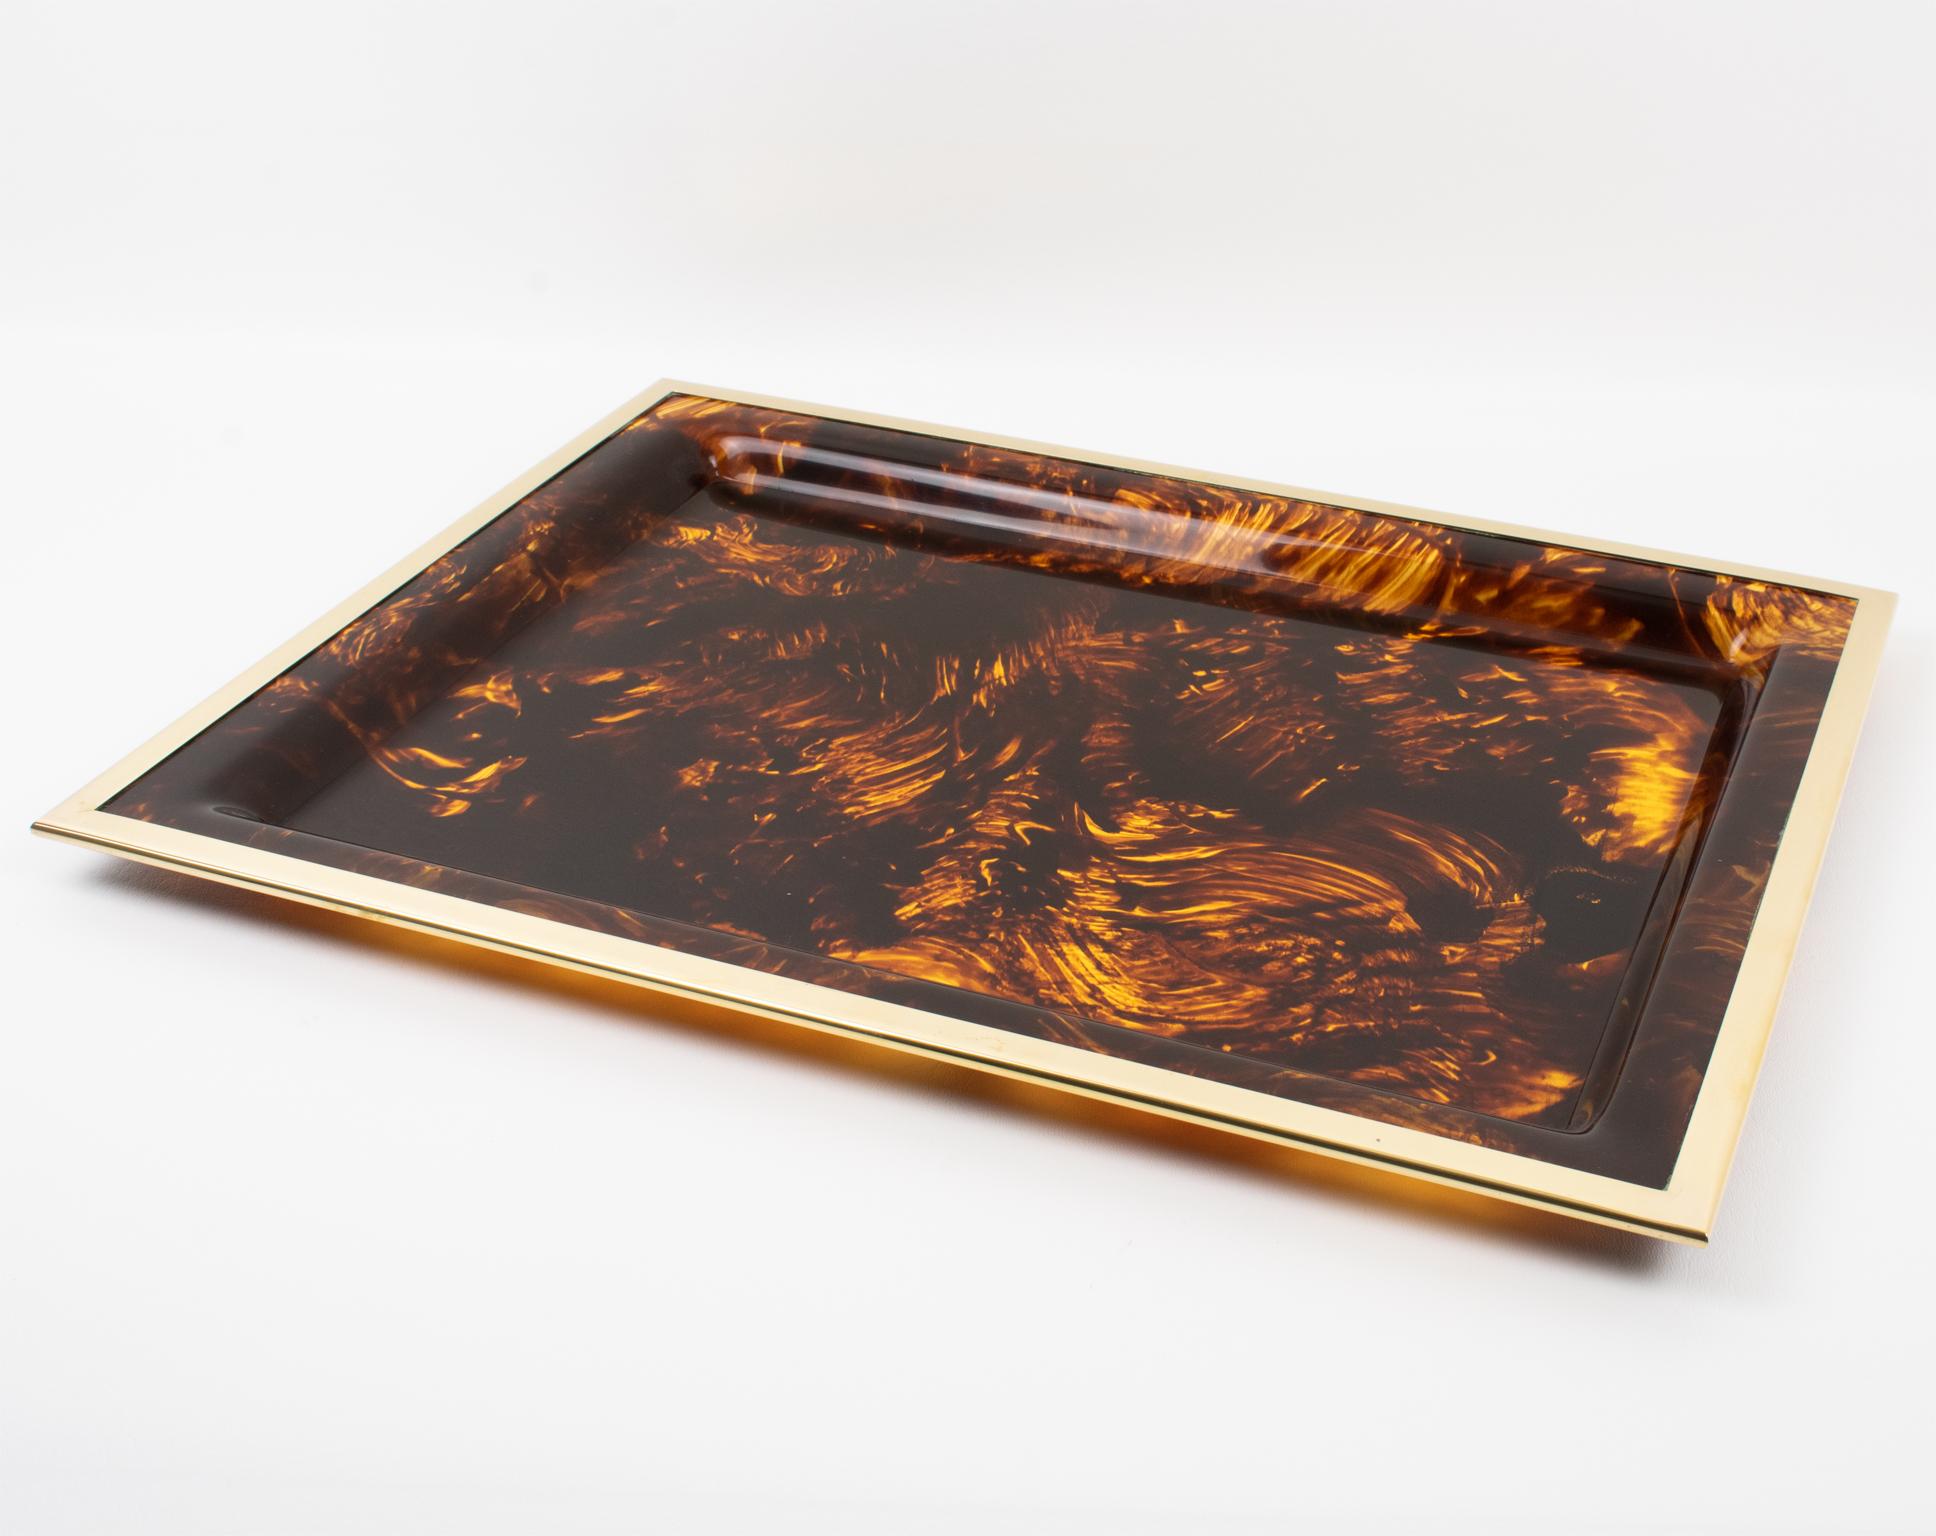 This stunning Mid-Century modernist barware serving tray or platter was crafted in Italy for the Christian Dior Home collection in the 1970s. The large rectangular shape boasts a raised Lucite insert with faux tortoiseshell (tortoise) textured